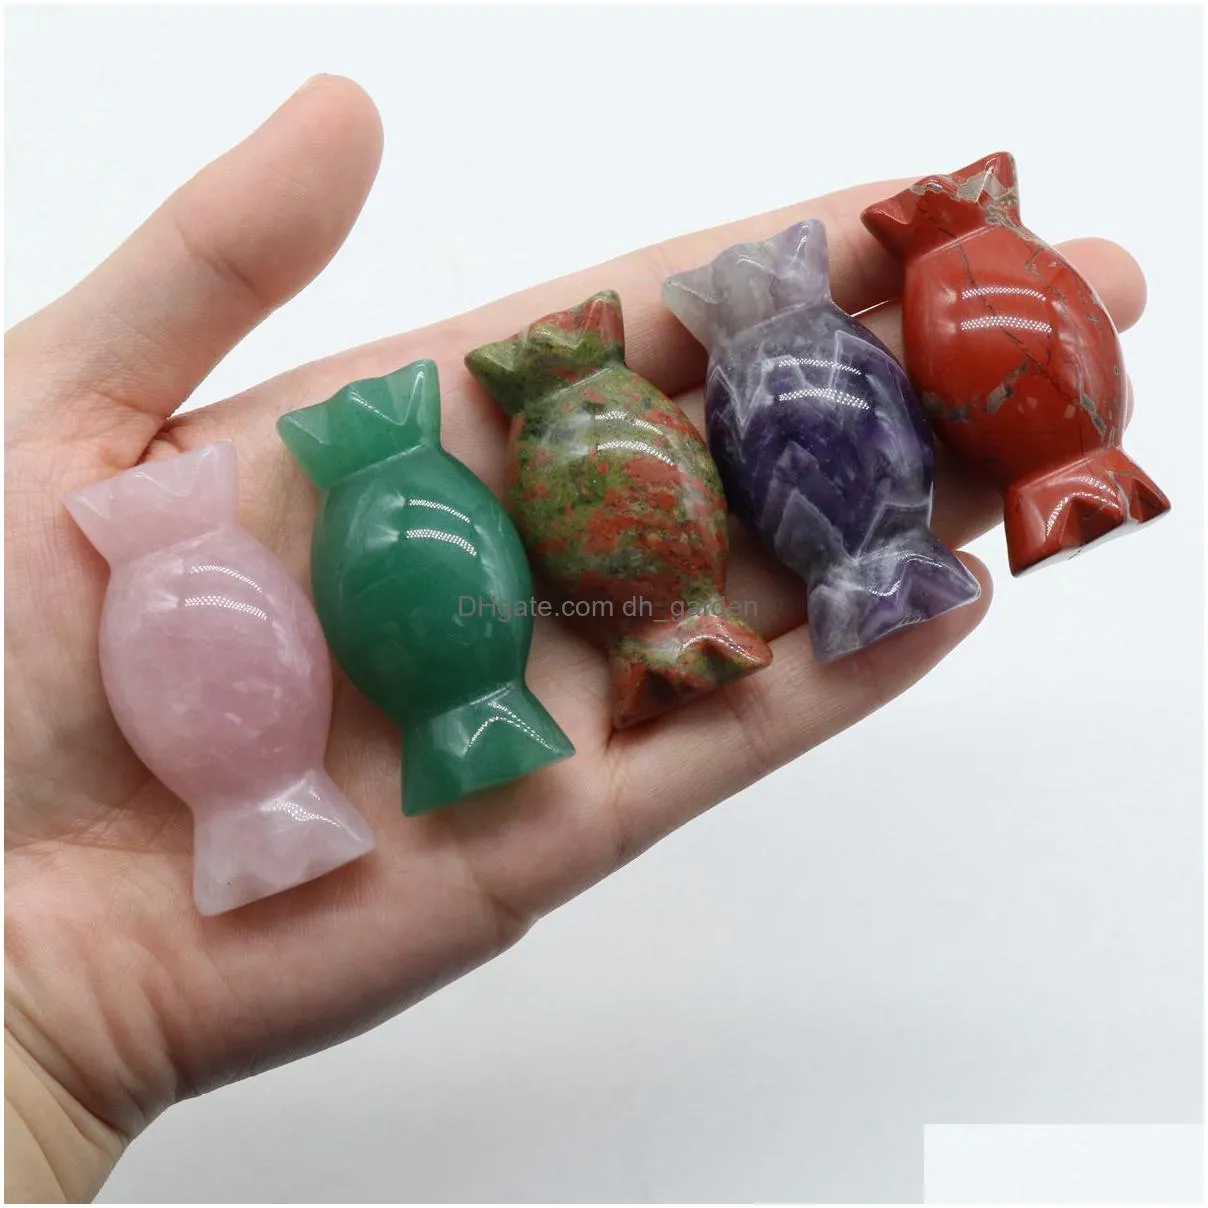 natural crystal stone carving festival candy gift gemstone agate ornaments folk arts healing energy for decorate